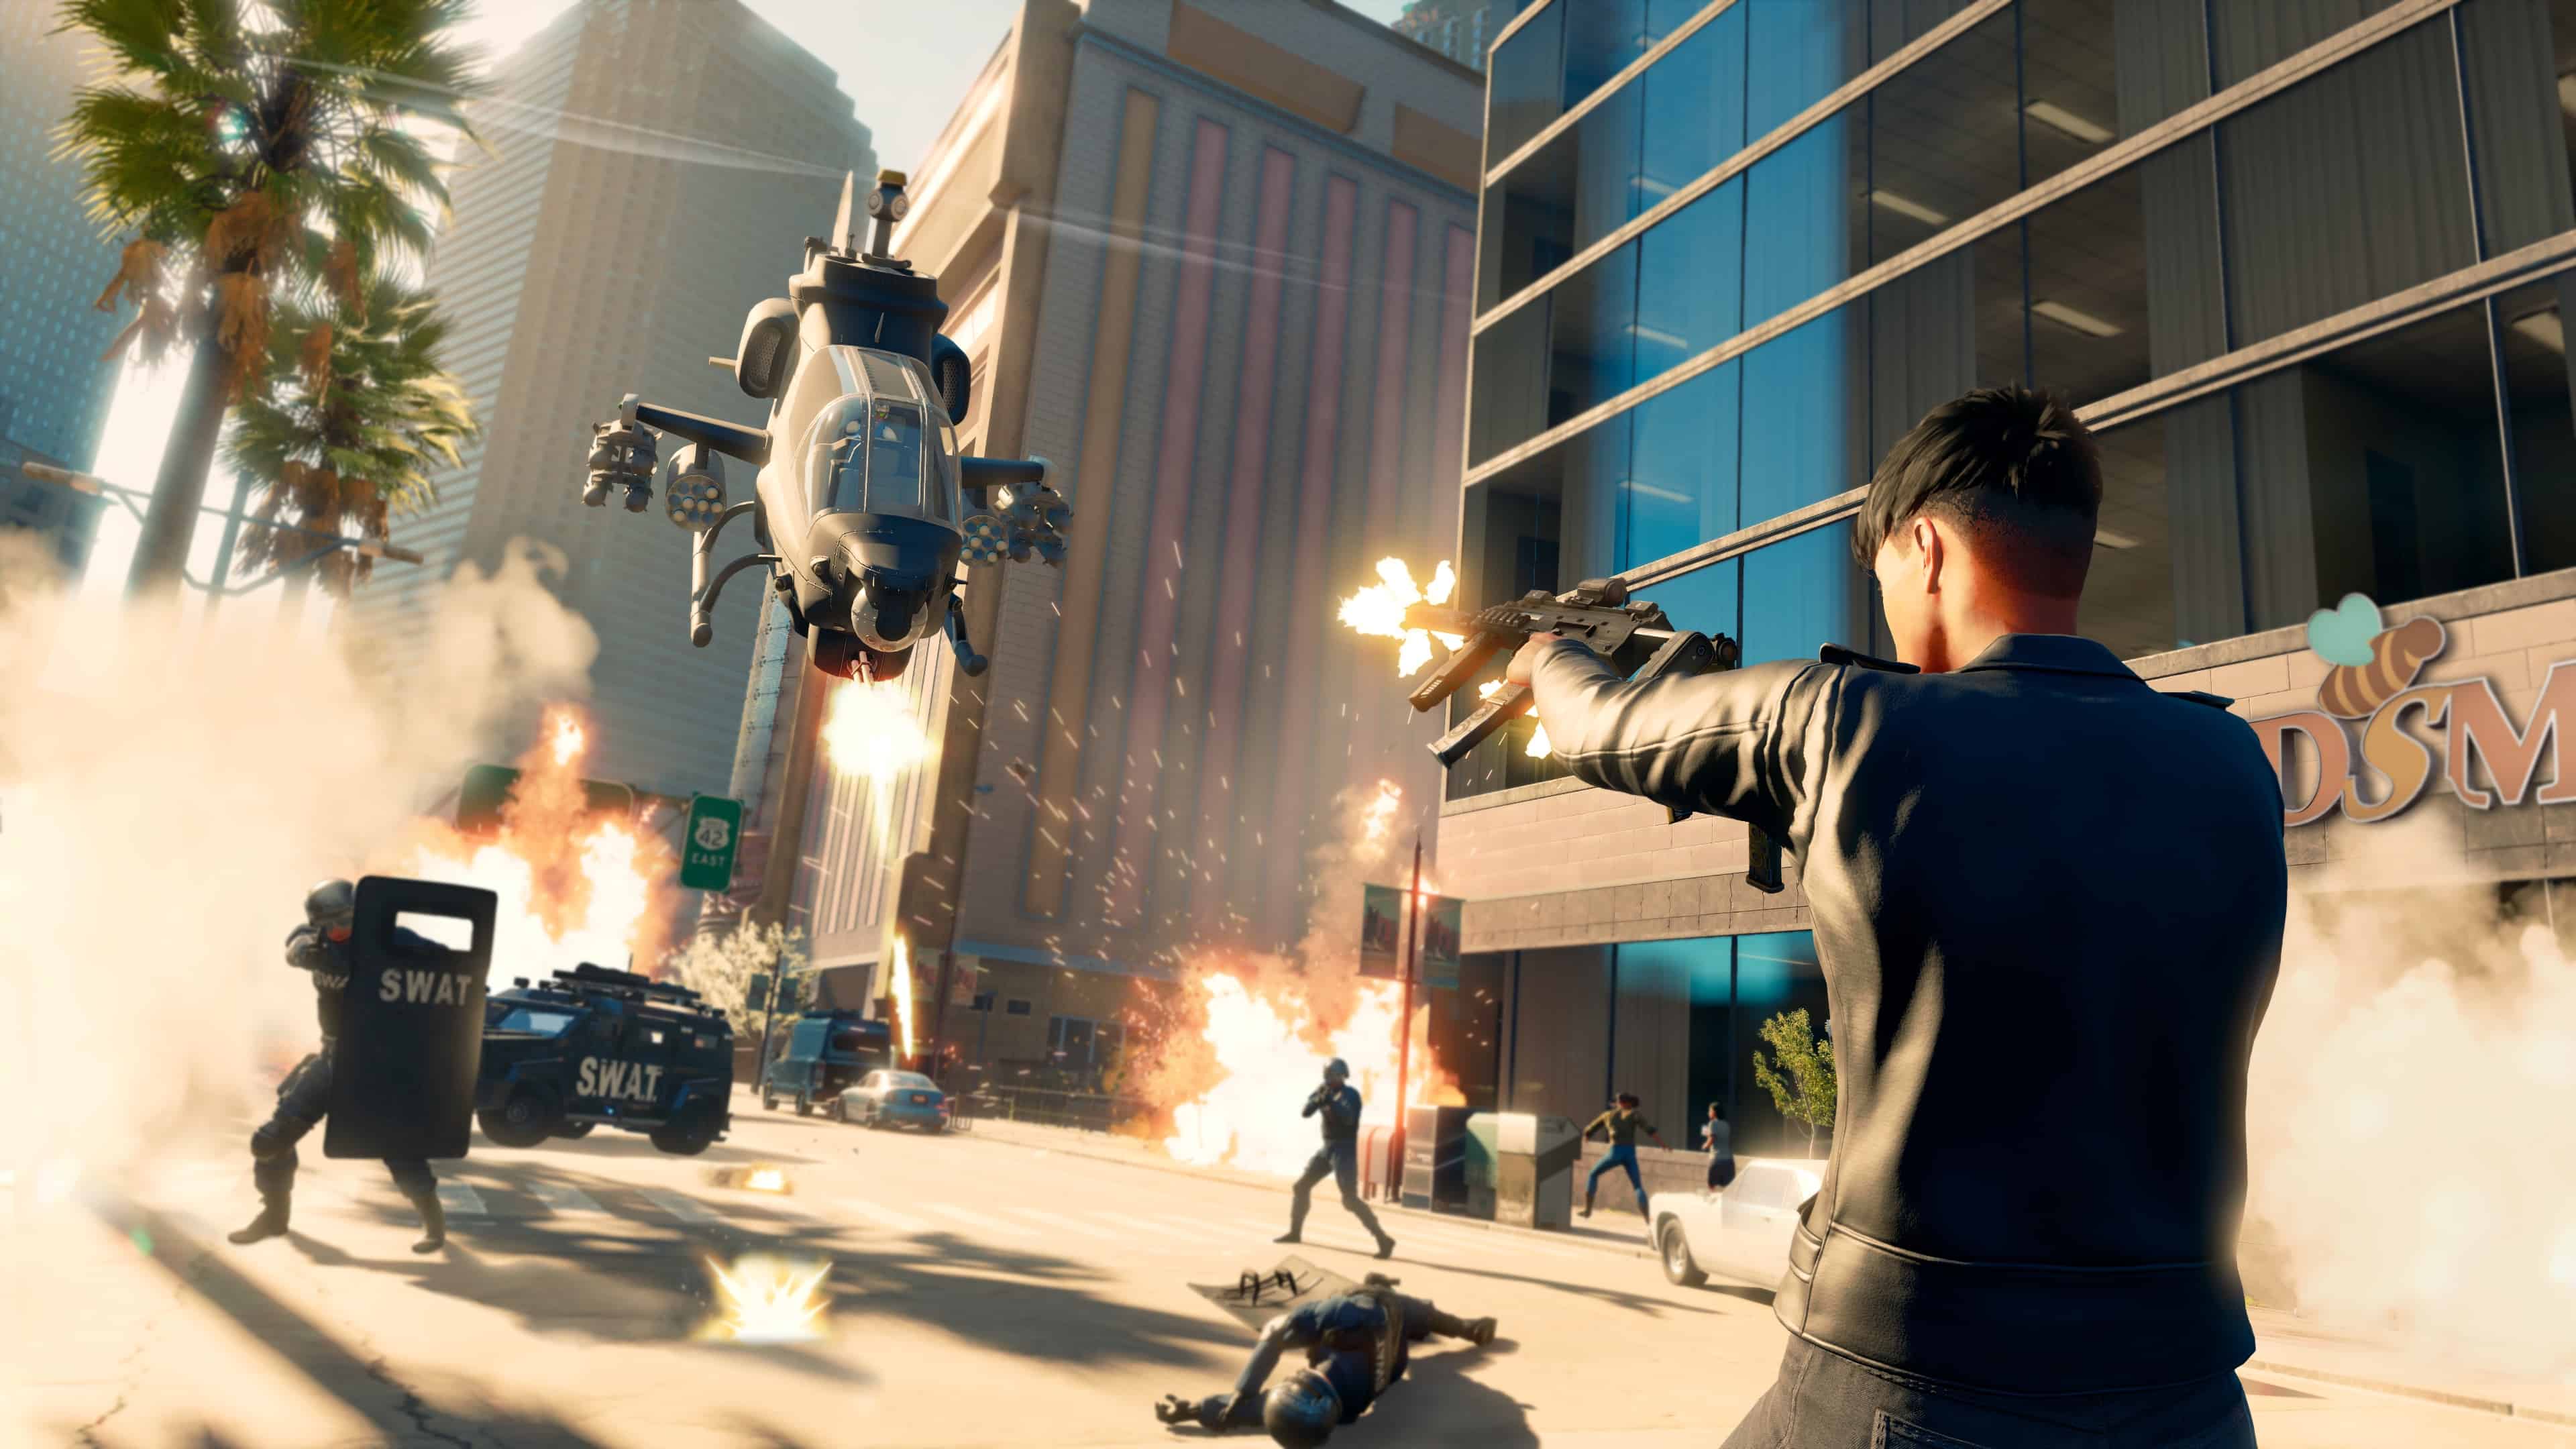 Saints Row screenshot showing combat against a helicopter